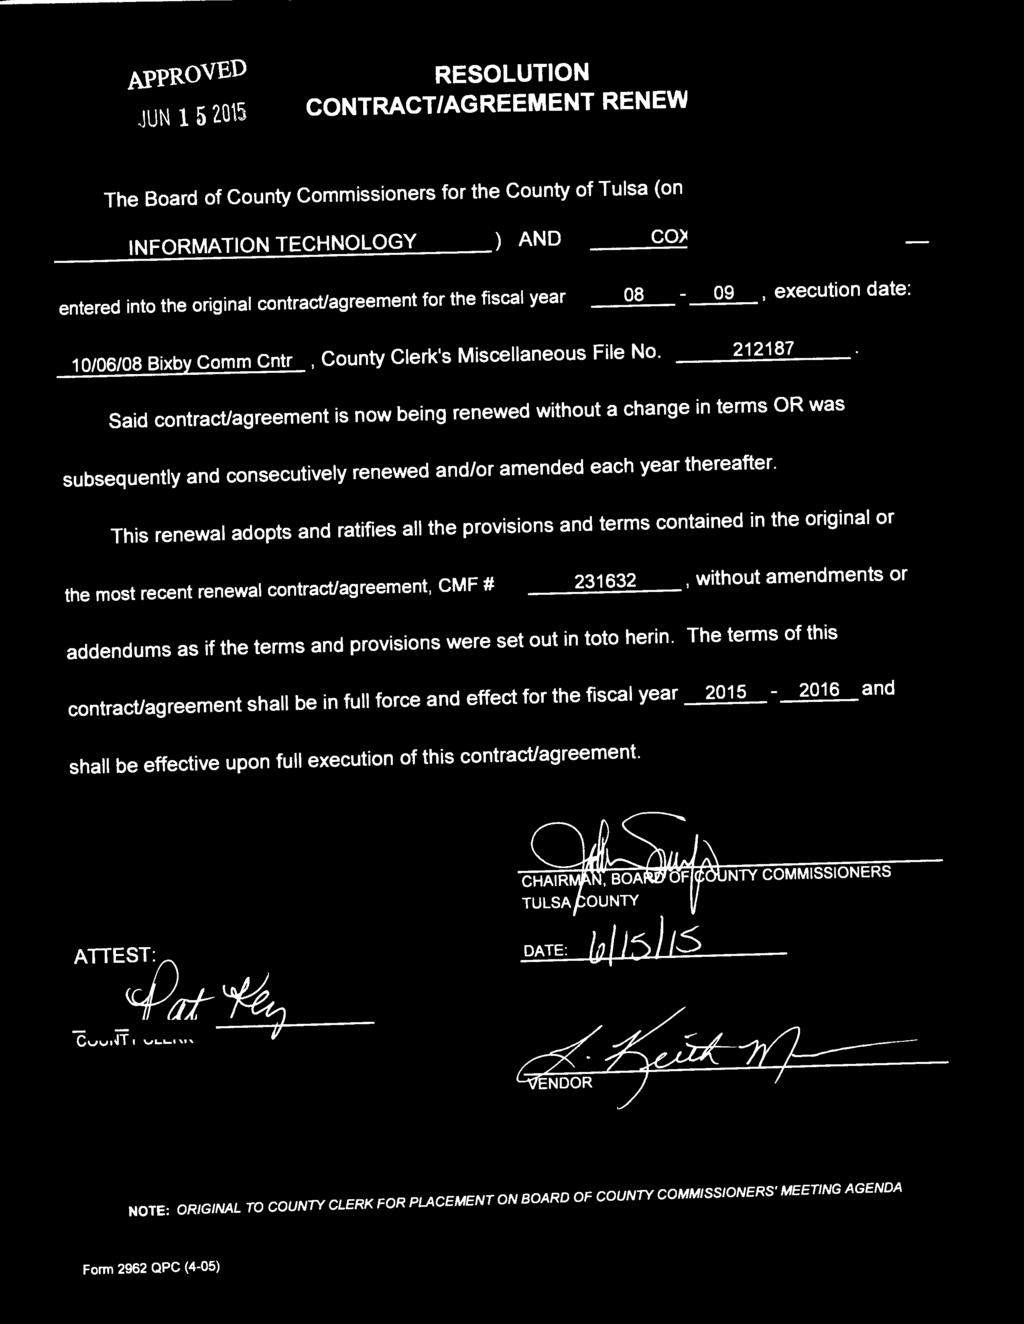 APPROVED JUN 1 5 l015 RESOLUTION Of o'r'i.lahoma CONTRACT/AGREEMENT RENEWAr A~~L S _.!{q~~1y The Board of County Commissioners for the County of Tulsa (on behalf of 1 \ ~ JU \ 0 ~ m: \ 1 lloj PA\!